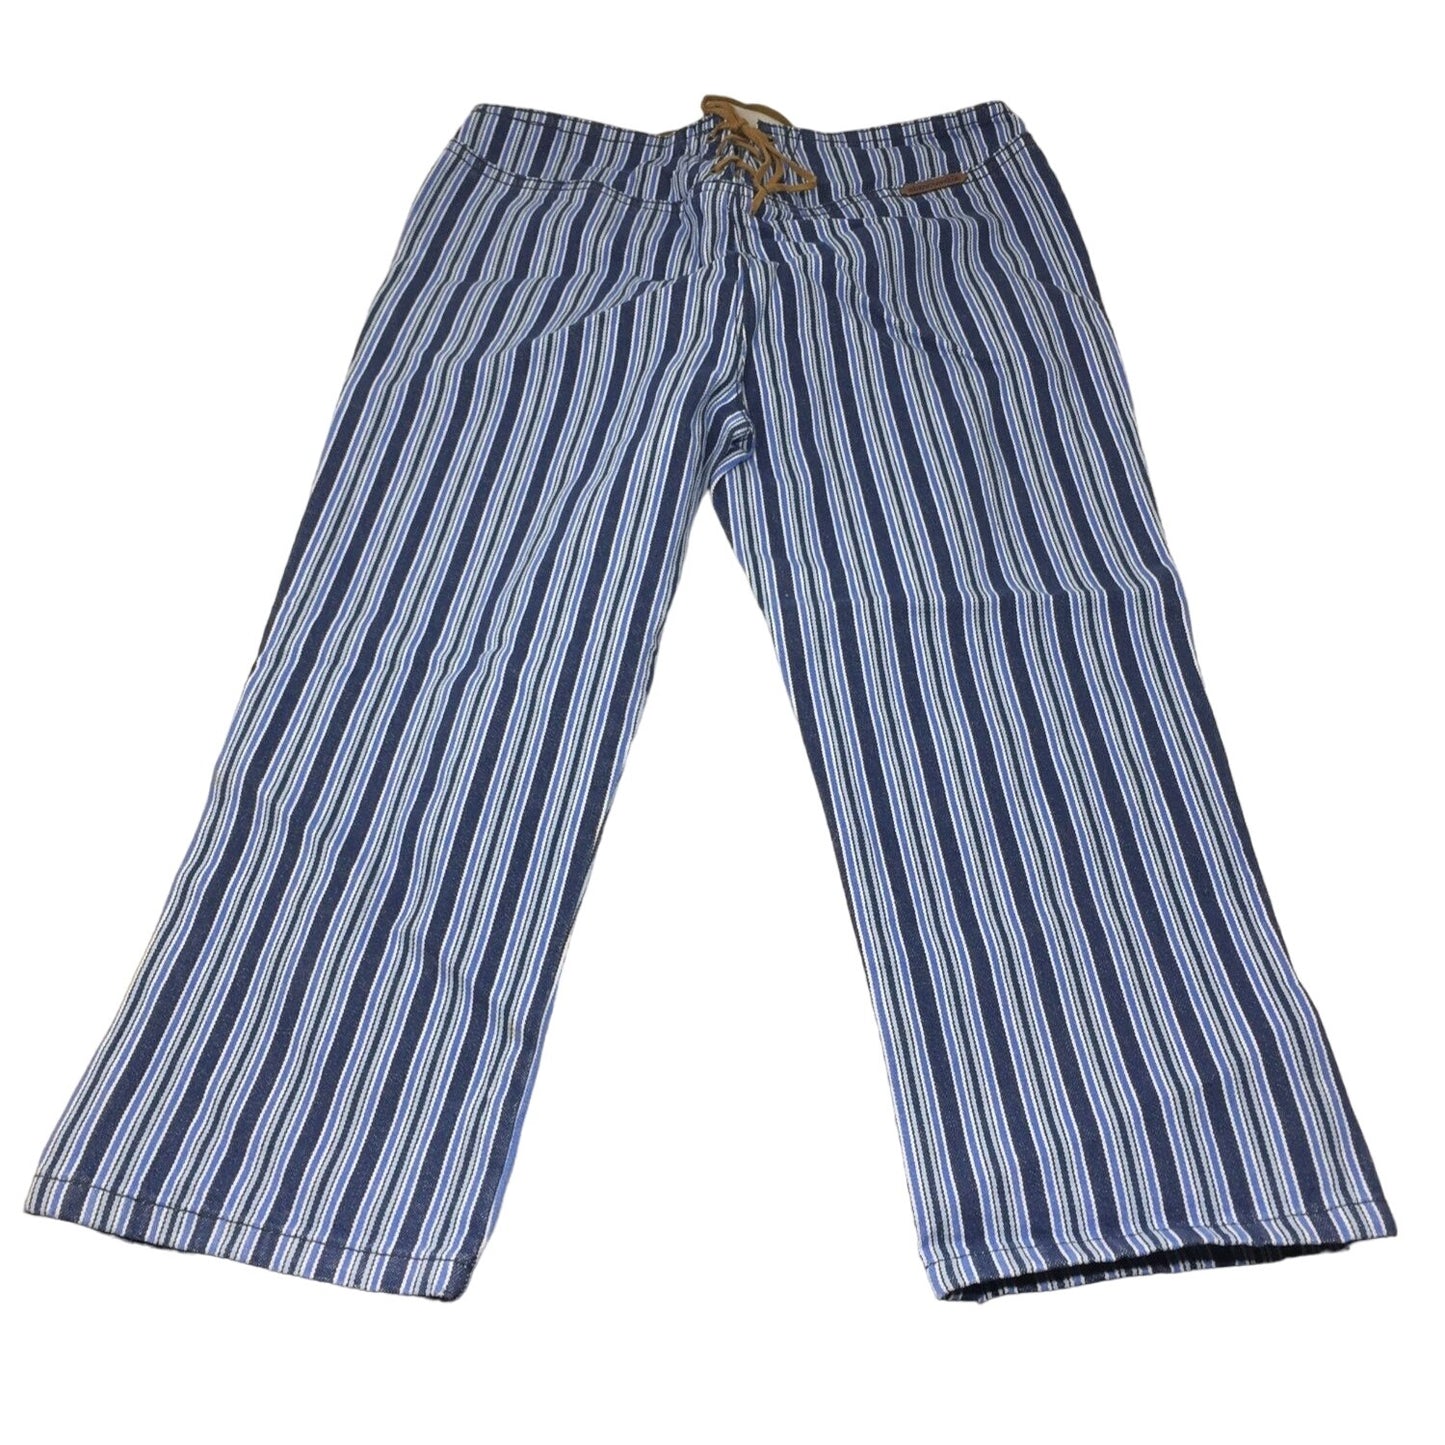 Abercrombie Girls Size 10 Striped Blue Super Low Rise Capri Pants New with Tags